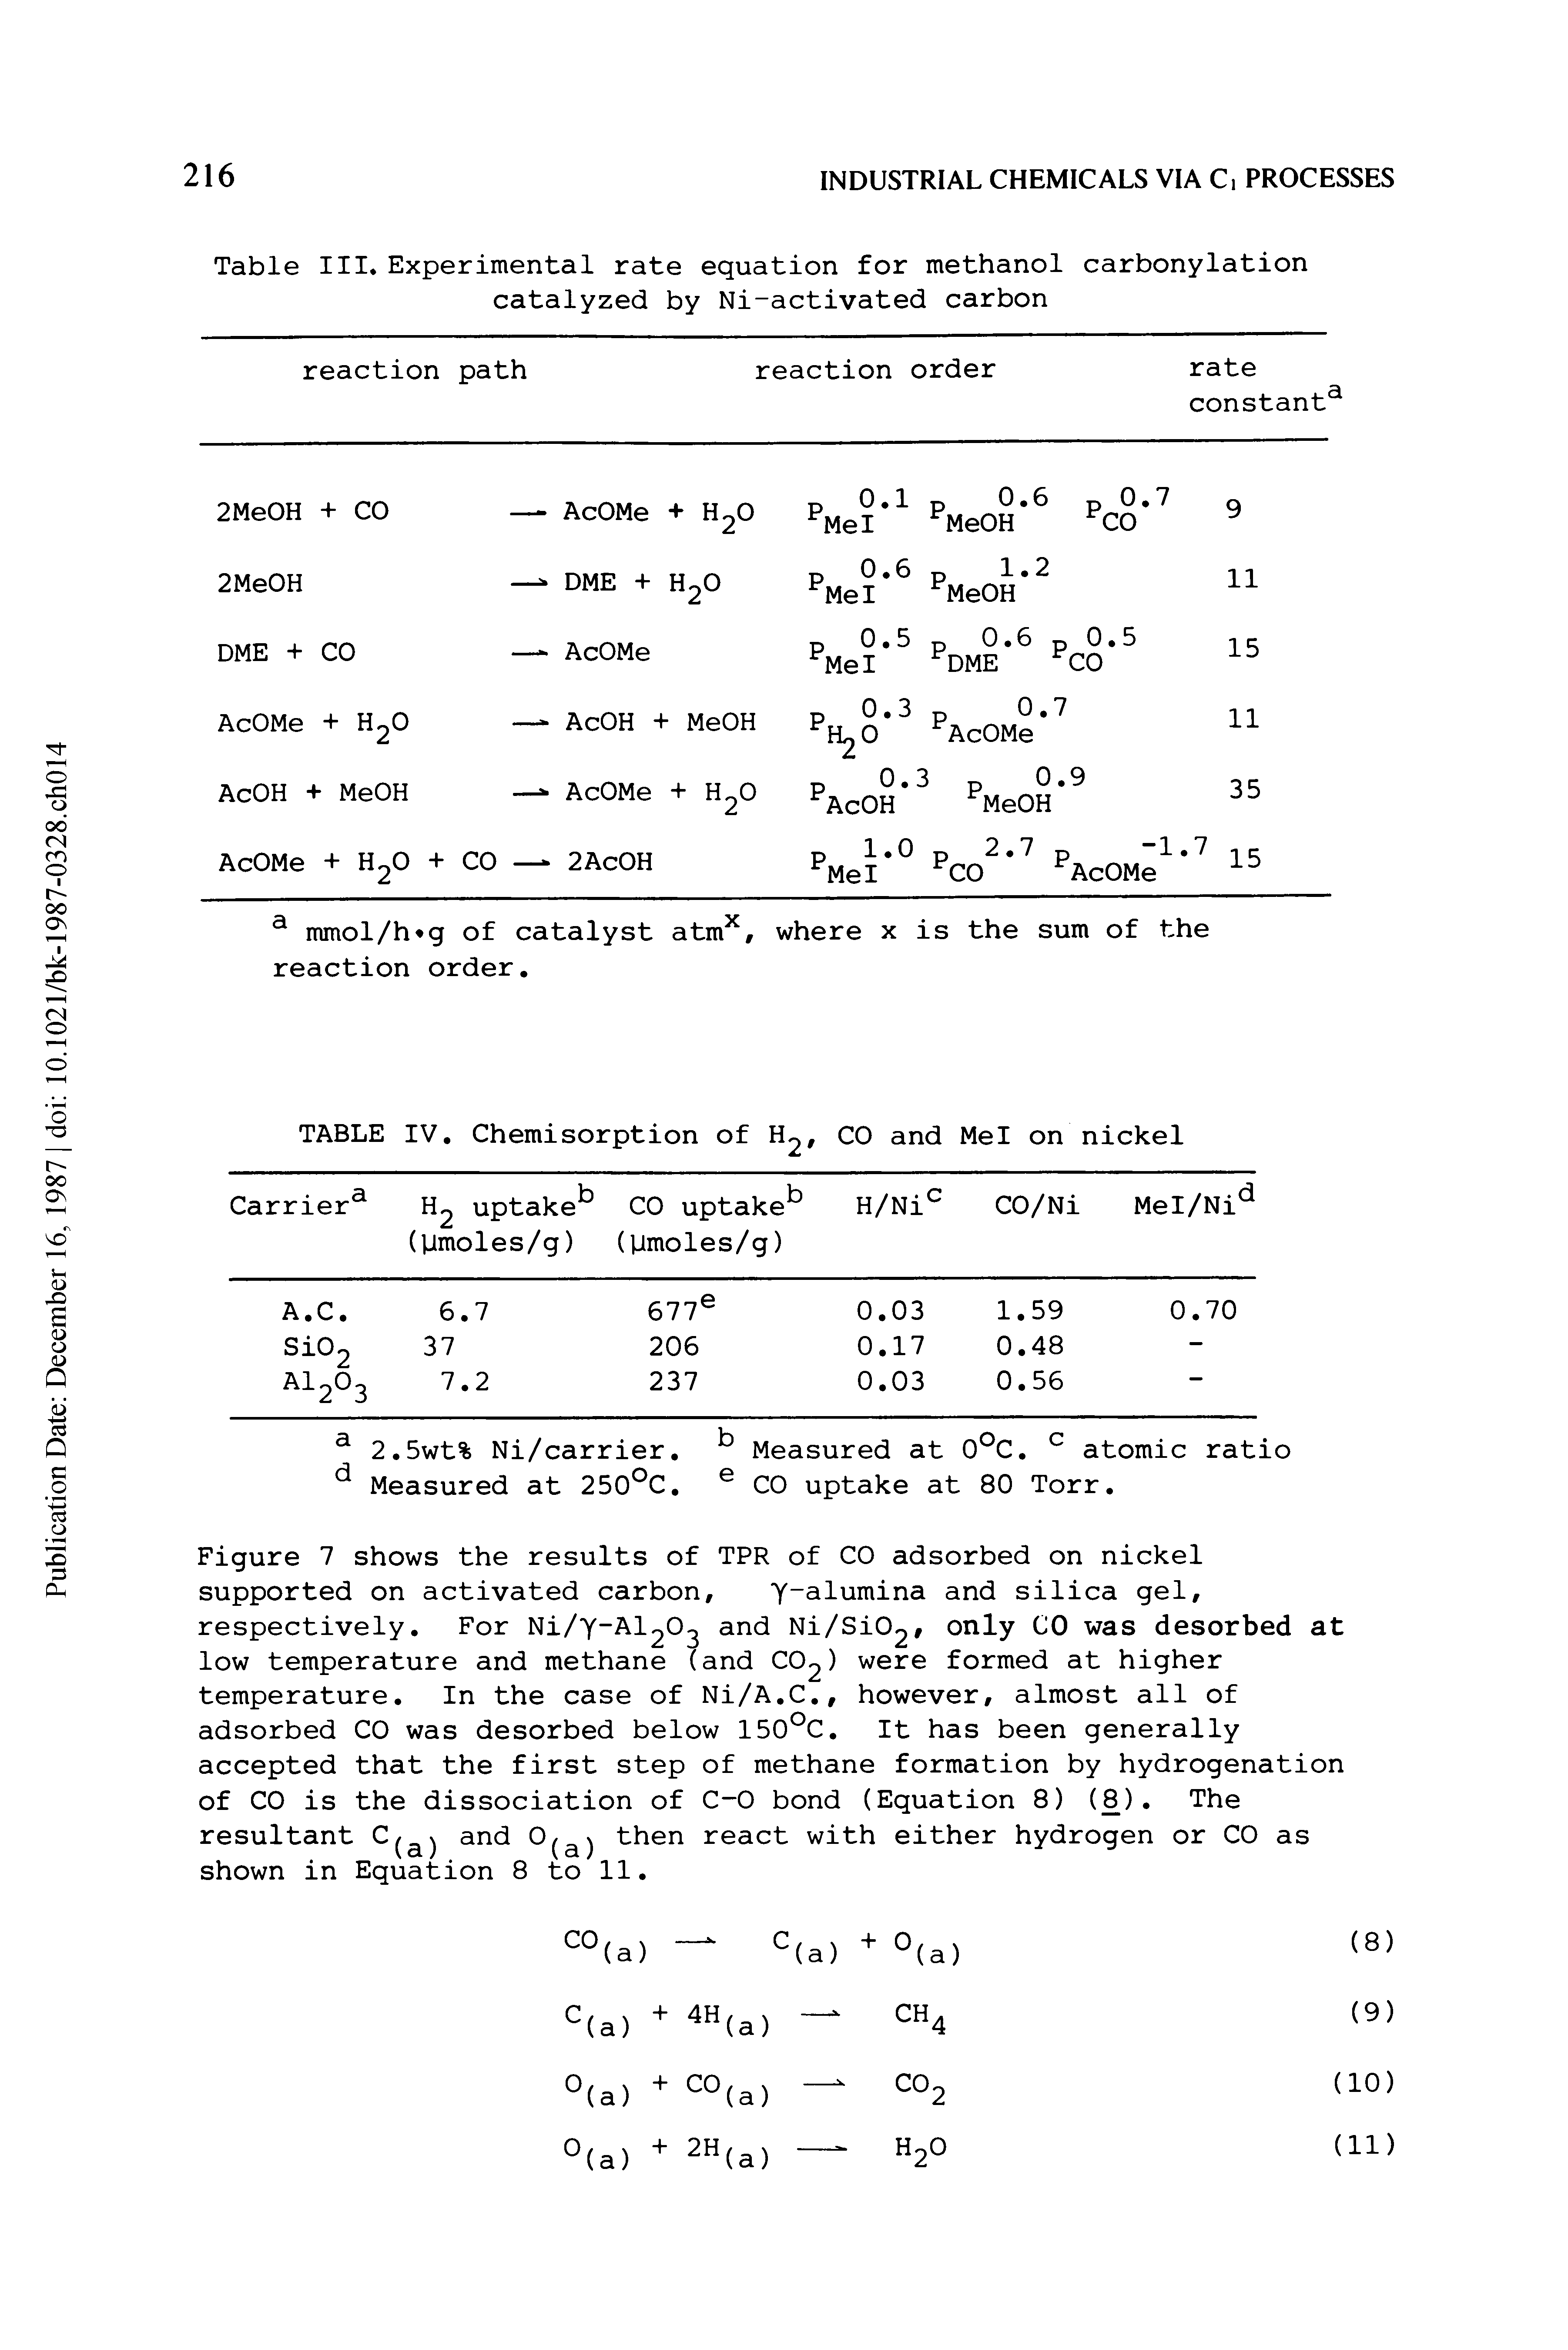 Table III. Experimental rate equation for methanol carbonylation catalyzed by Ni-activated carbon...